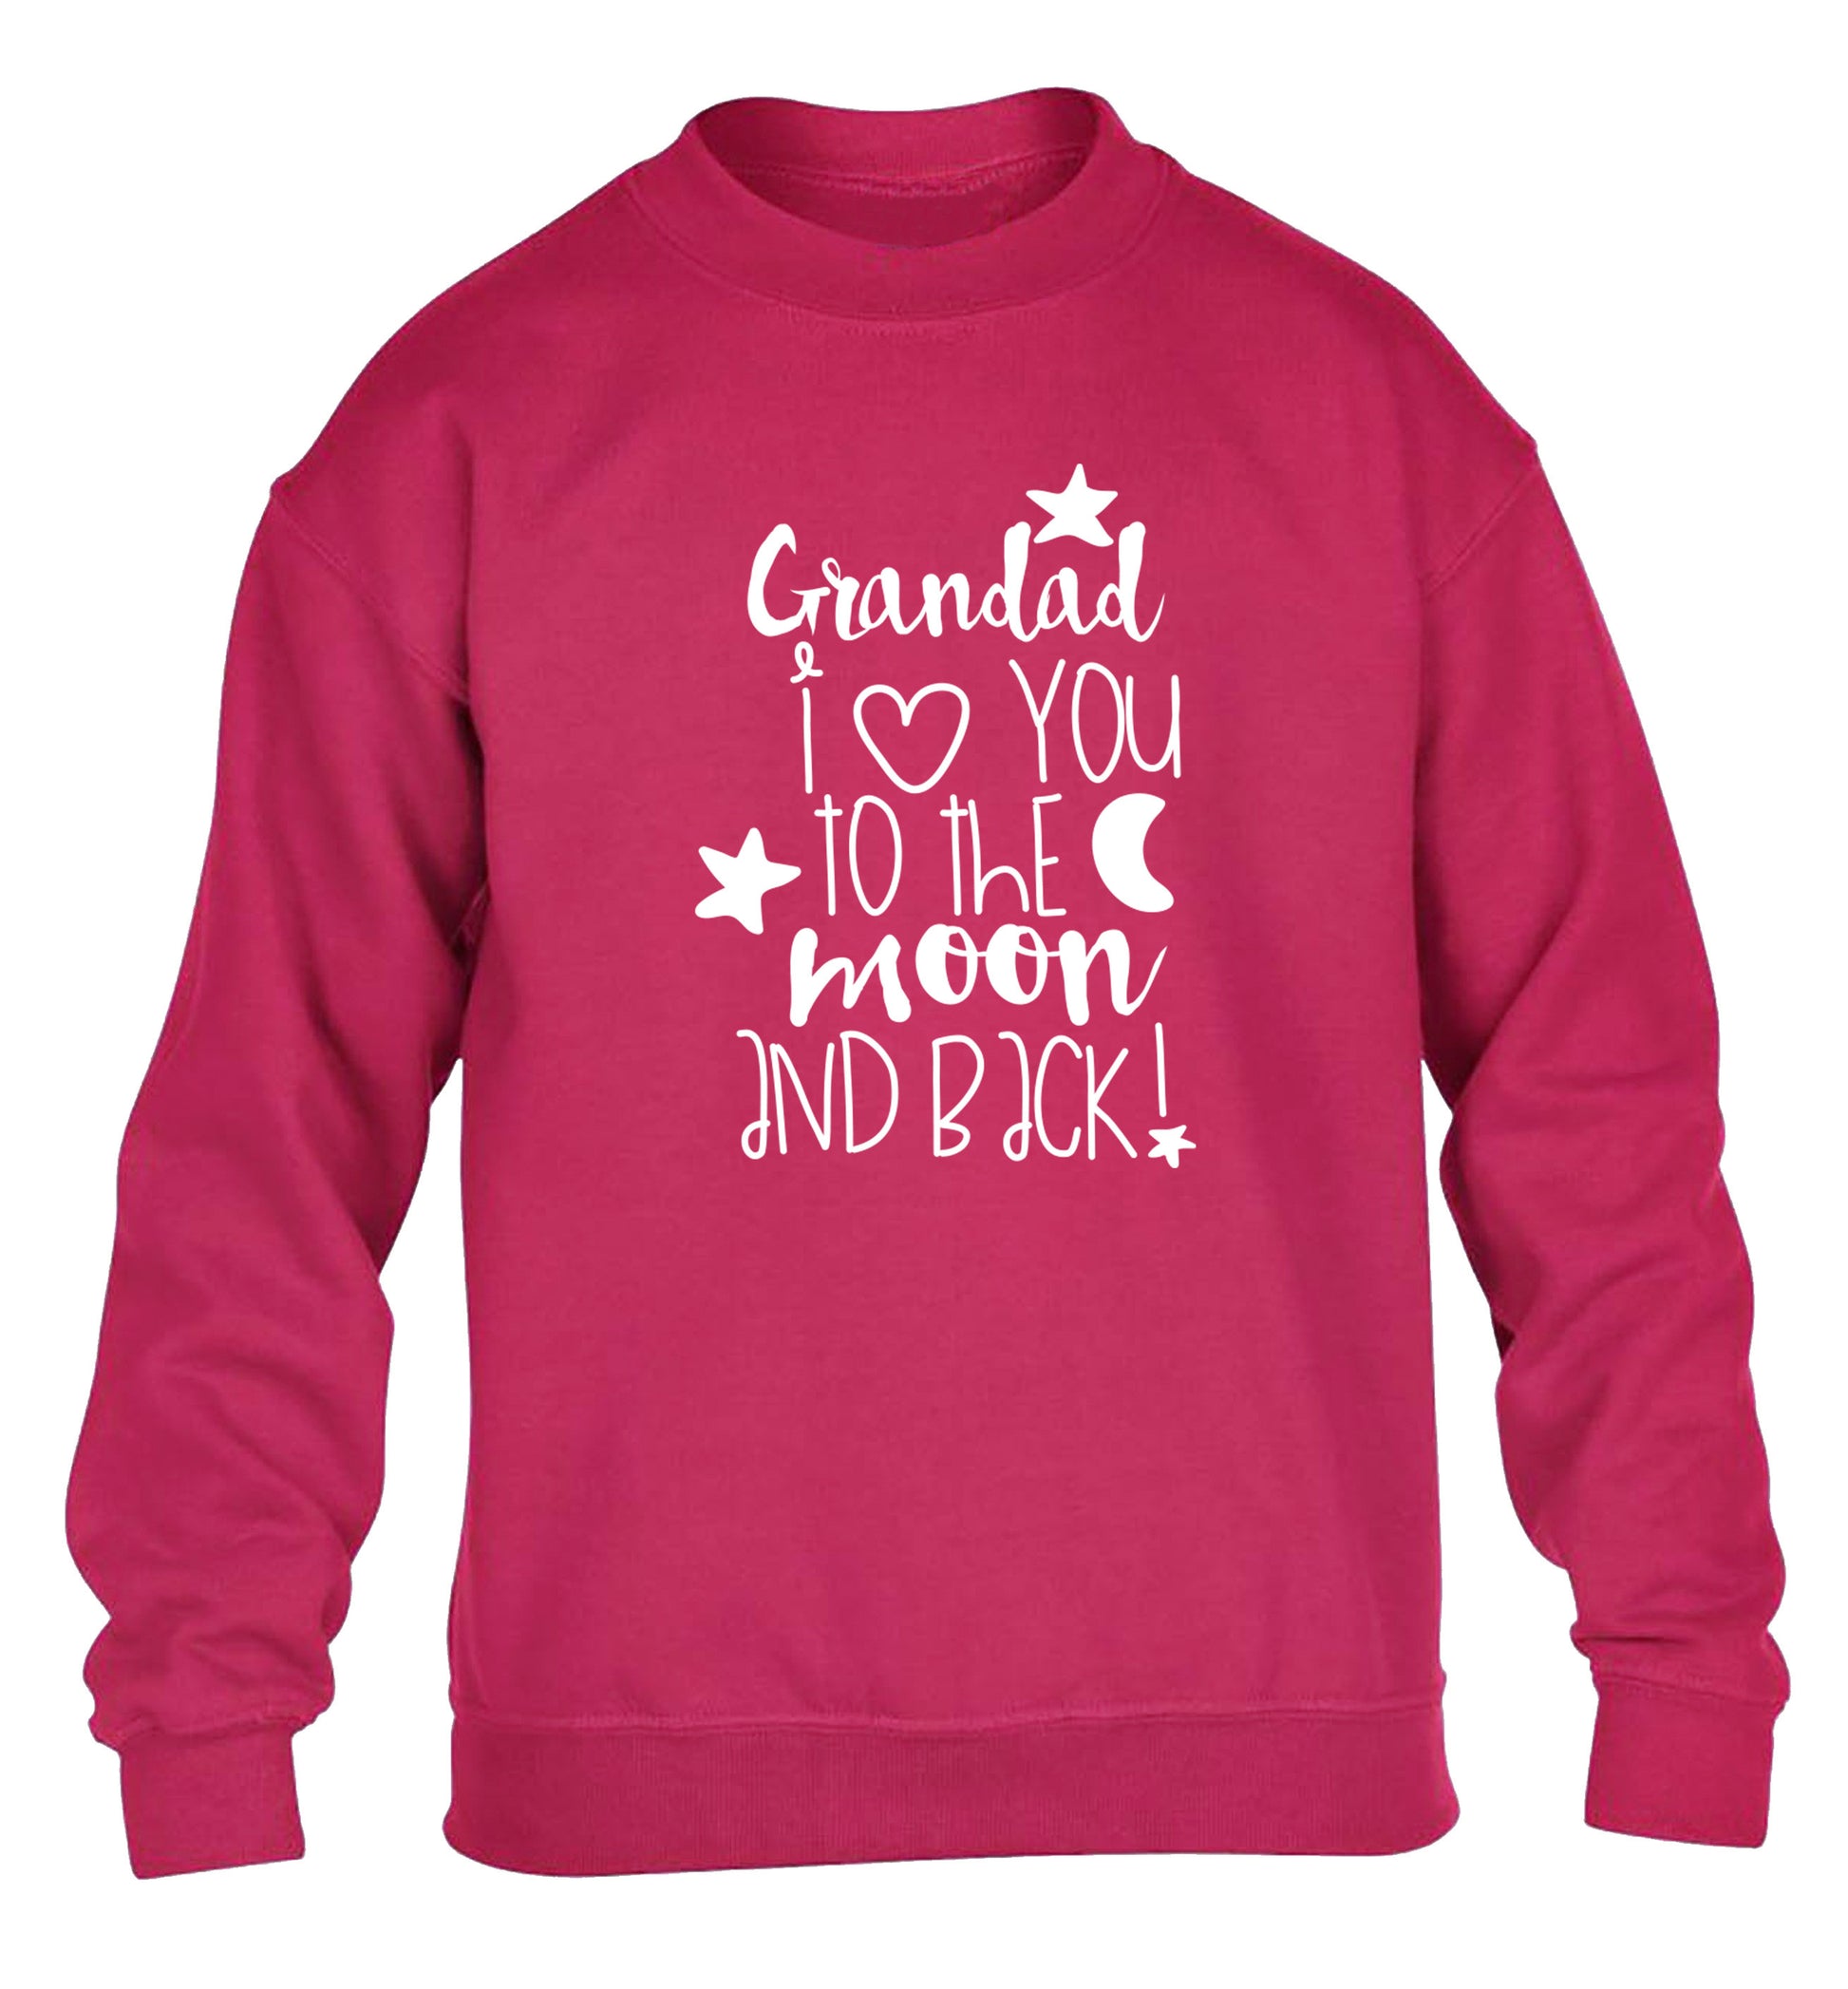 Grandad's I love you to the moon and back children's pink  sweater 12-14 Years